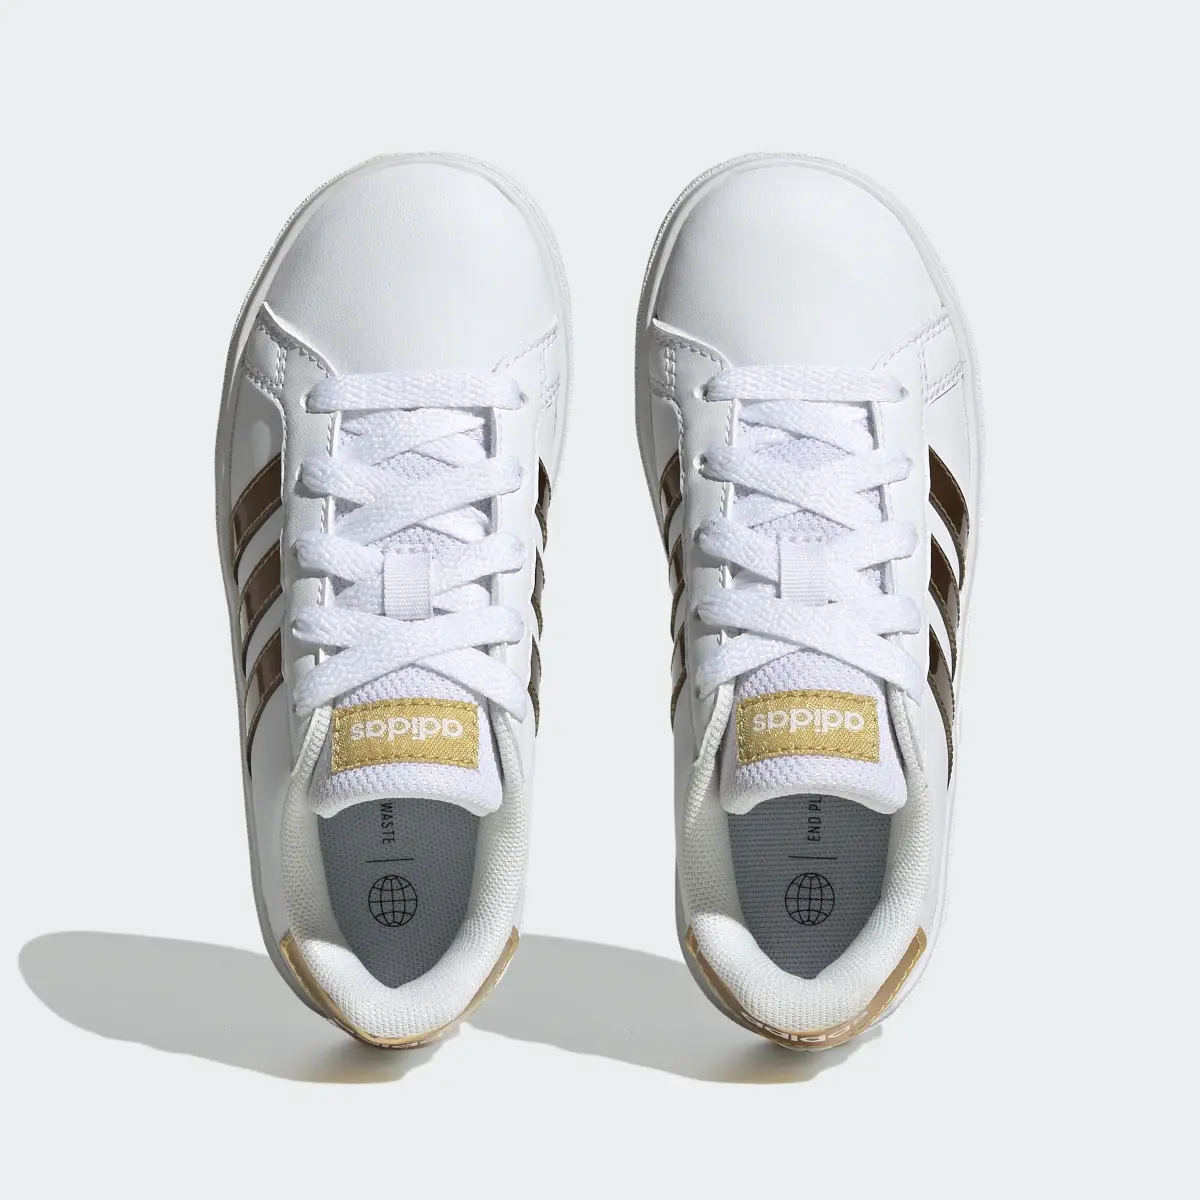 Adidas Grand Court Sustainable Lace Shoes. 3